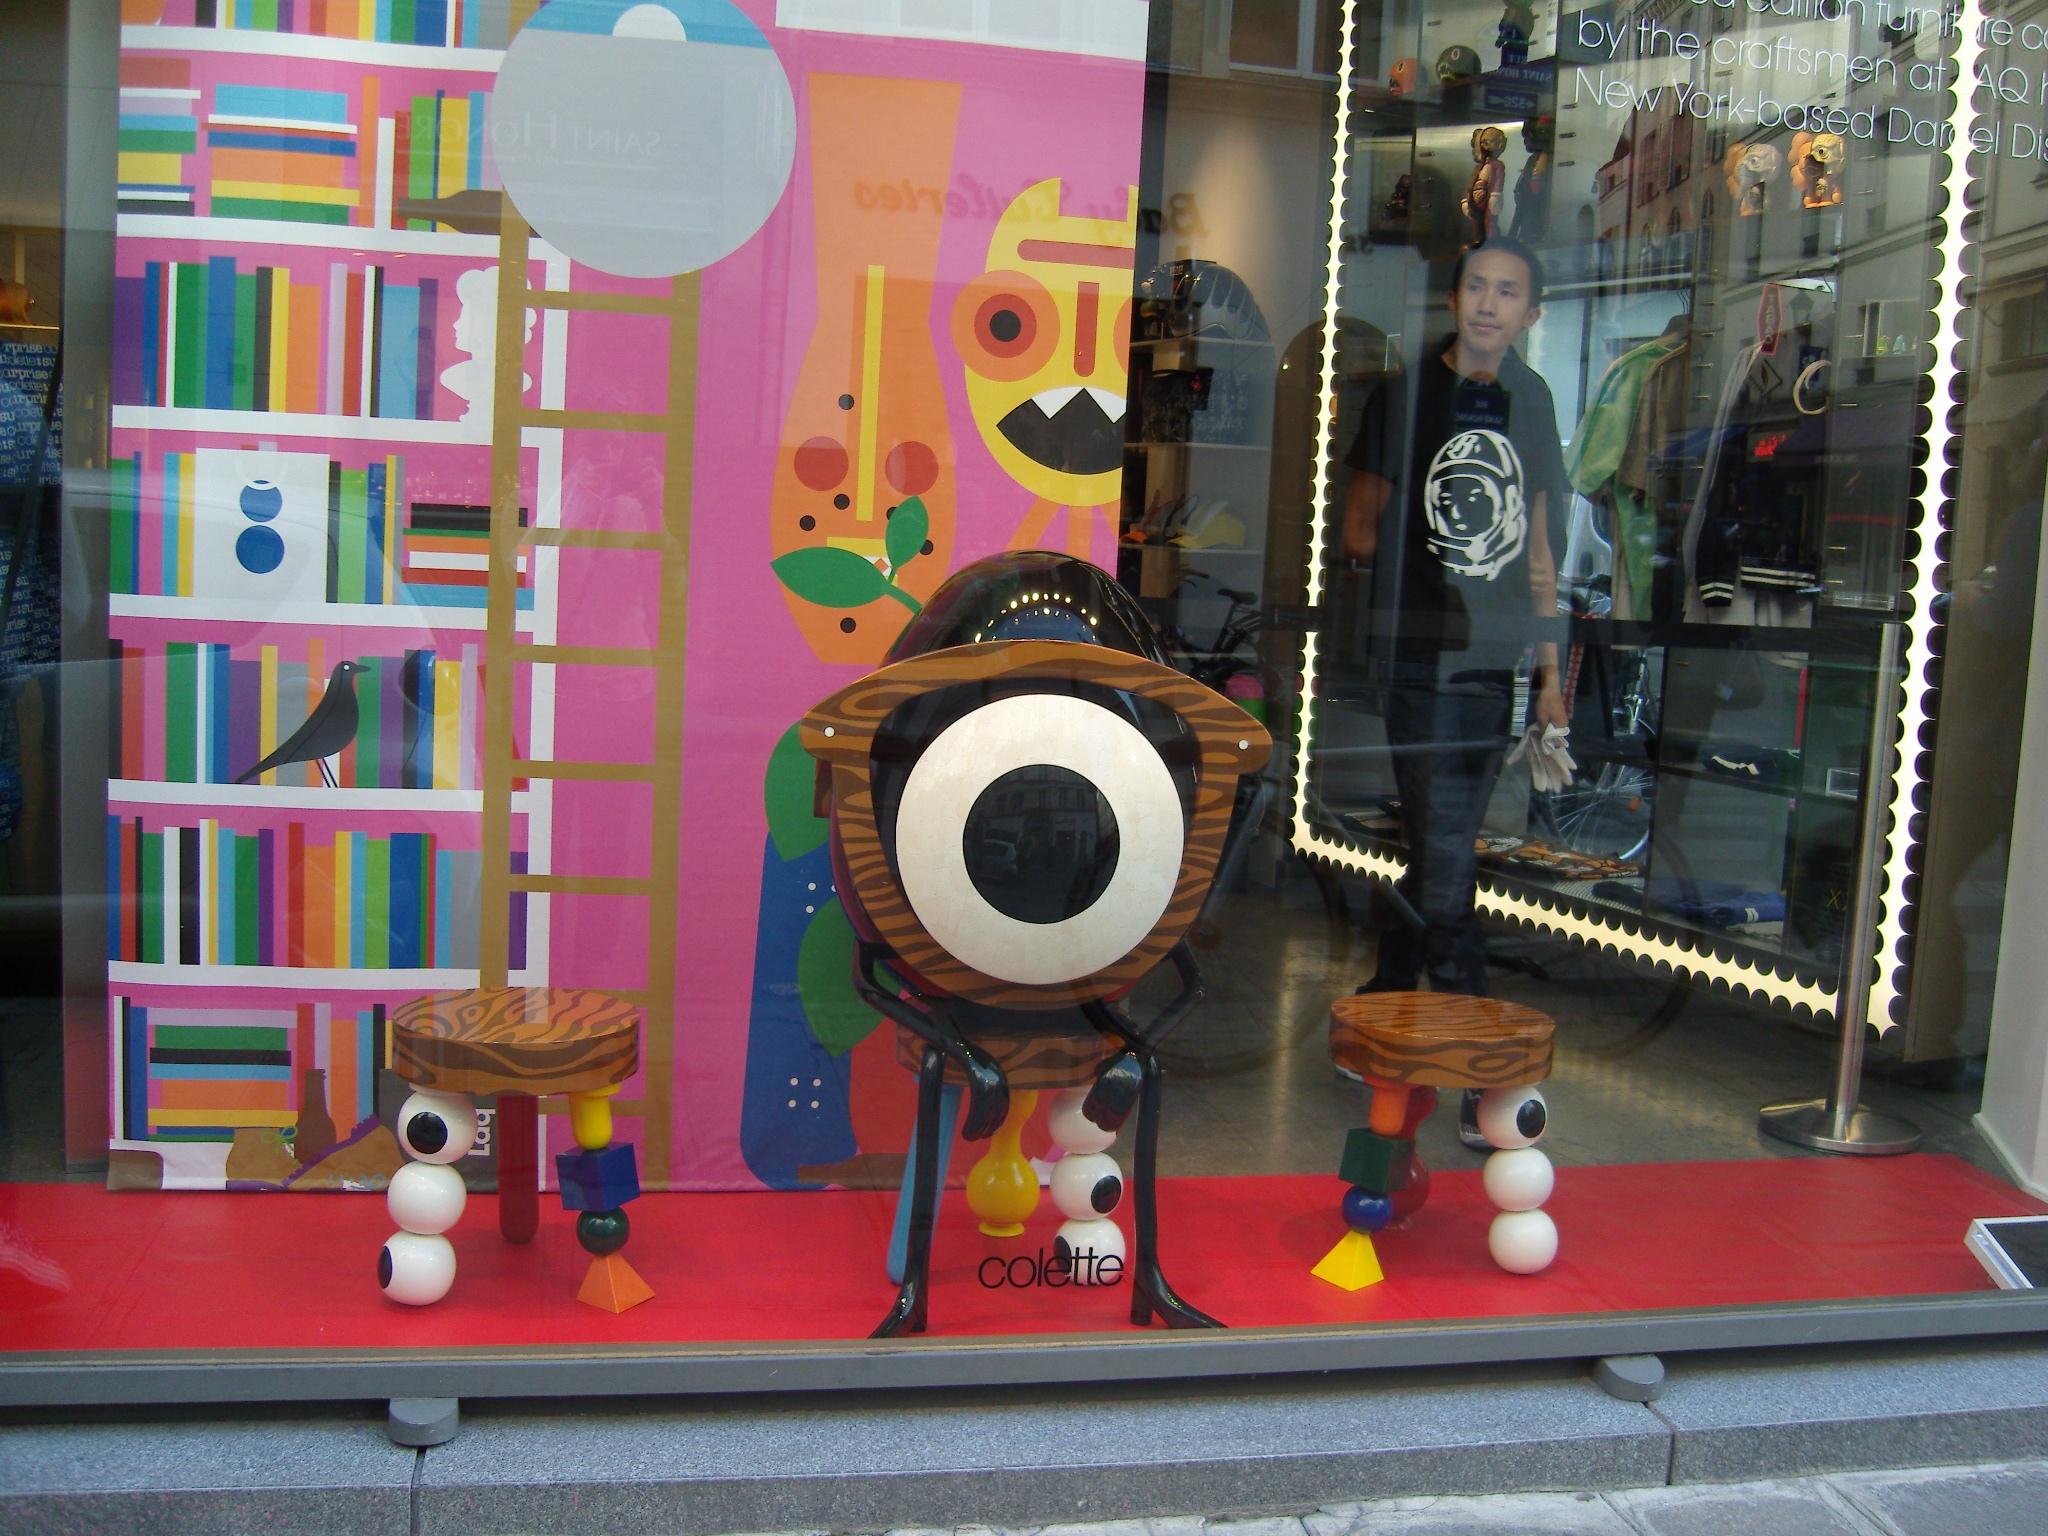 Window display at Colette in Paris. Photo by alphacityguides.